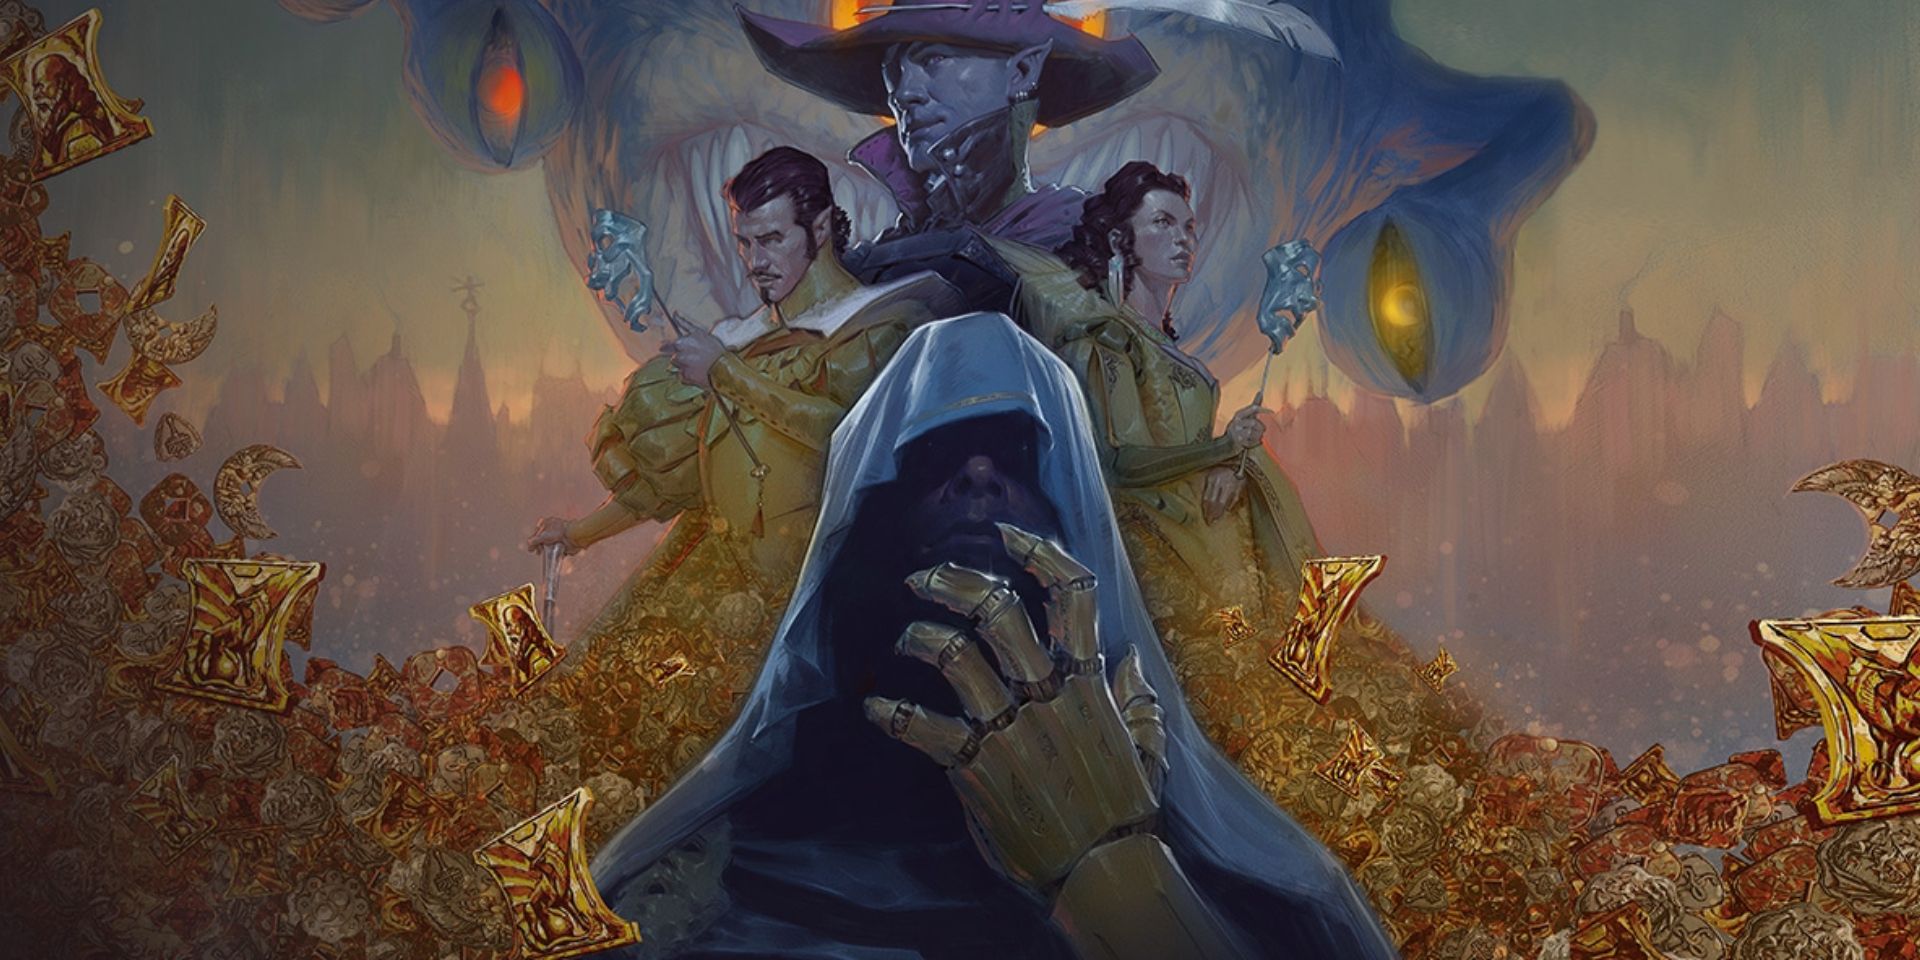 DnD characters and enemies arranged like a movie poster, with a beholder looming in the background and a hooded figure wearing a golden gauntlet in front.